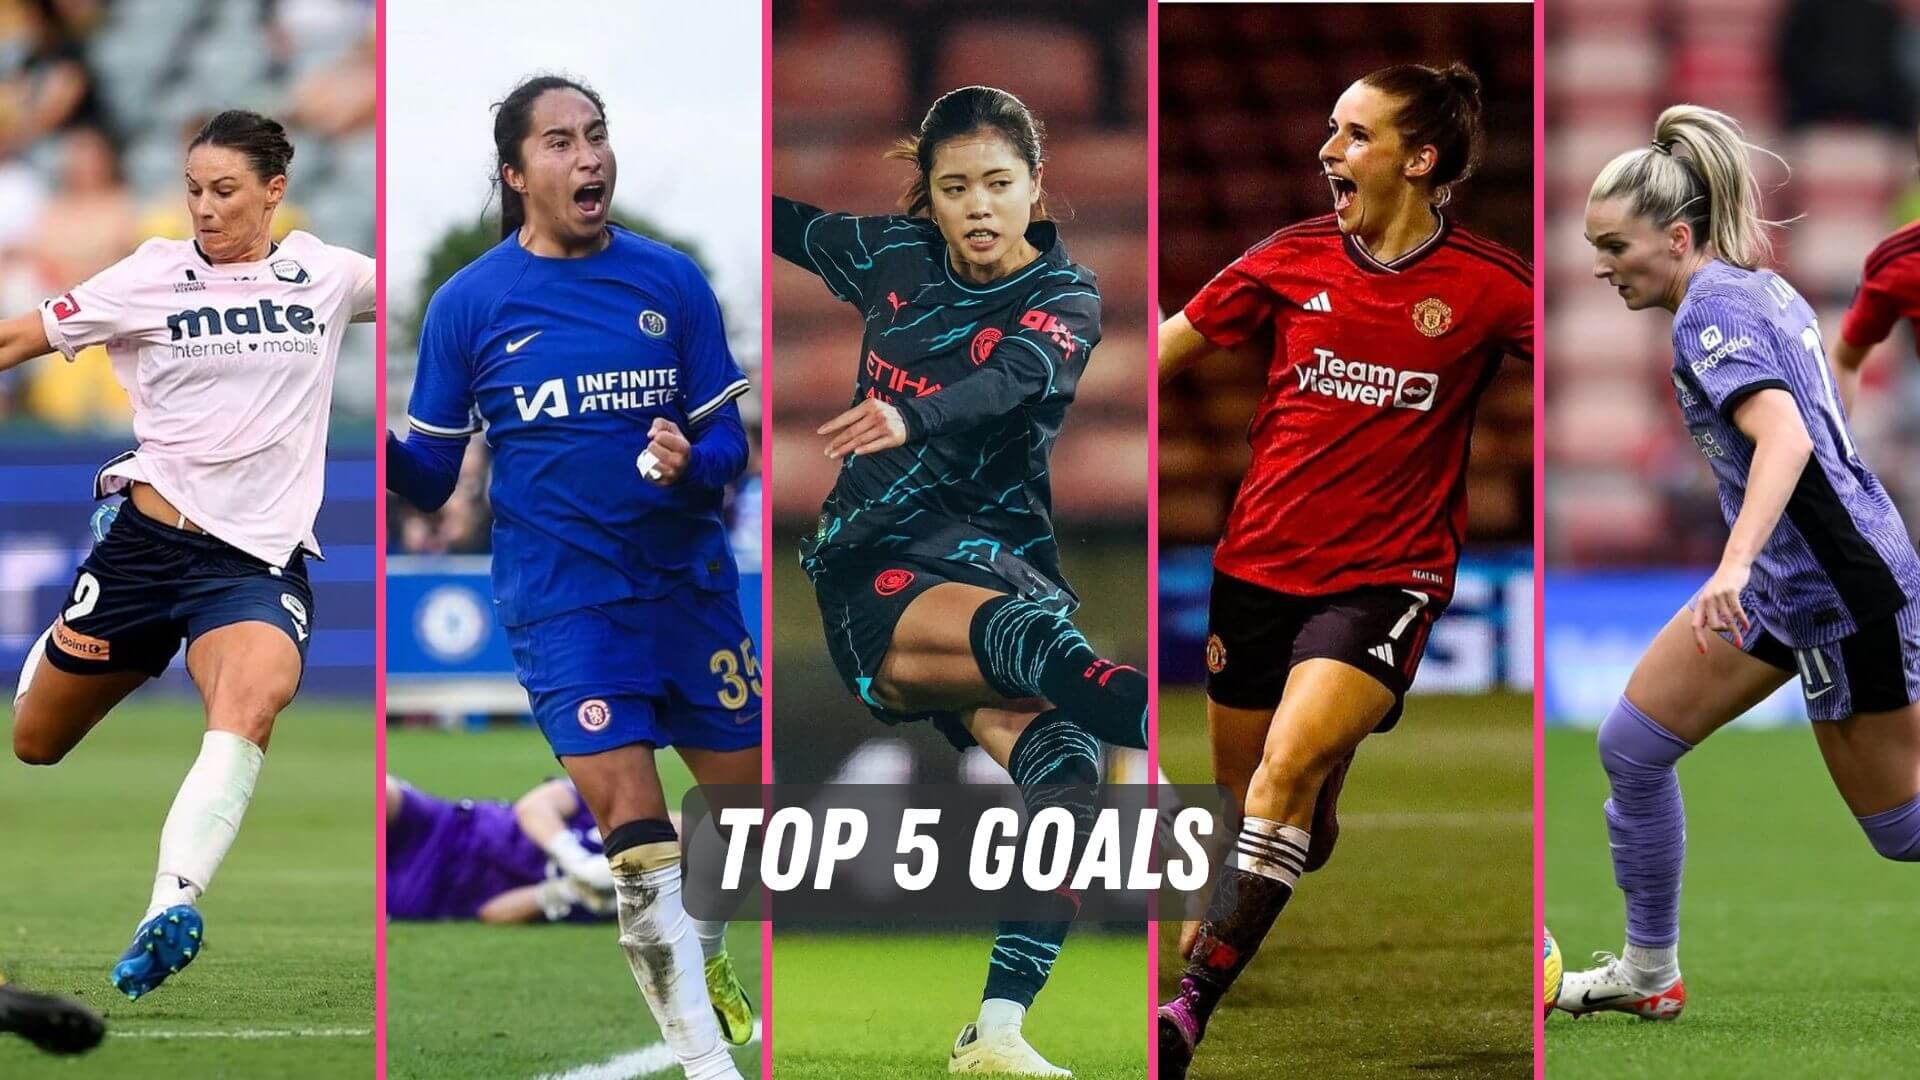 The Top 5 Goals of the week